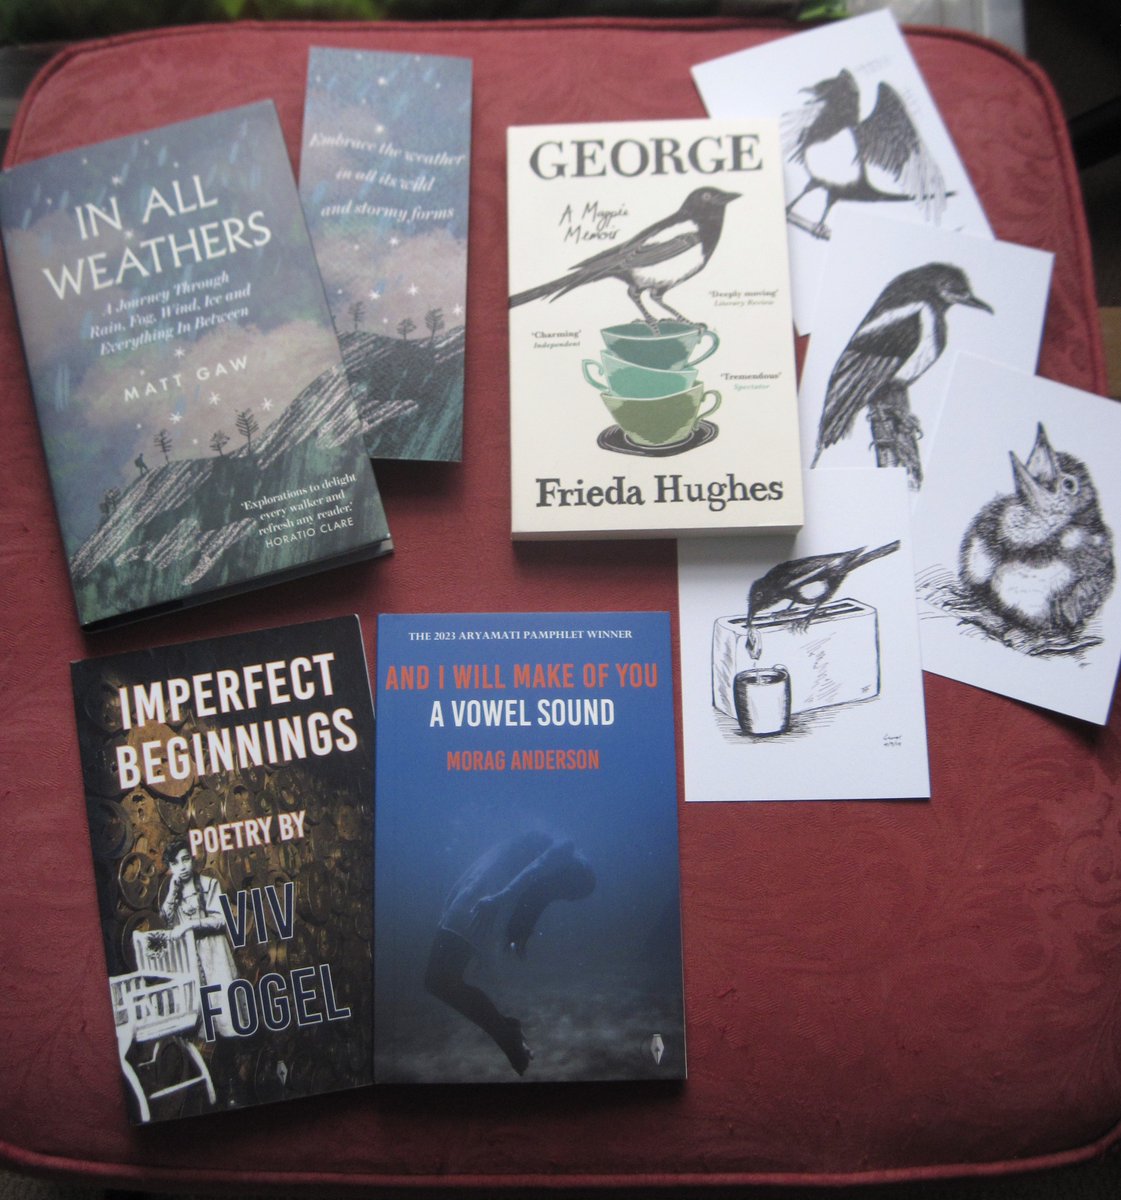 Great #bookpost today! Thanks to @eandtbooks for a copy of IN ALL WEATHERS by Matt Gaw, out on Thursday; @ProfileBooks for the new paperback (and postcards) of GEORGE by Frieda Hughes; and @fly_press for IMPERFECT BEGINNINGS (2023) & AND I WILL MAKE OF YOU A VOWEL SOUND (24 May).